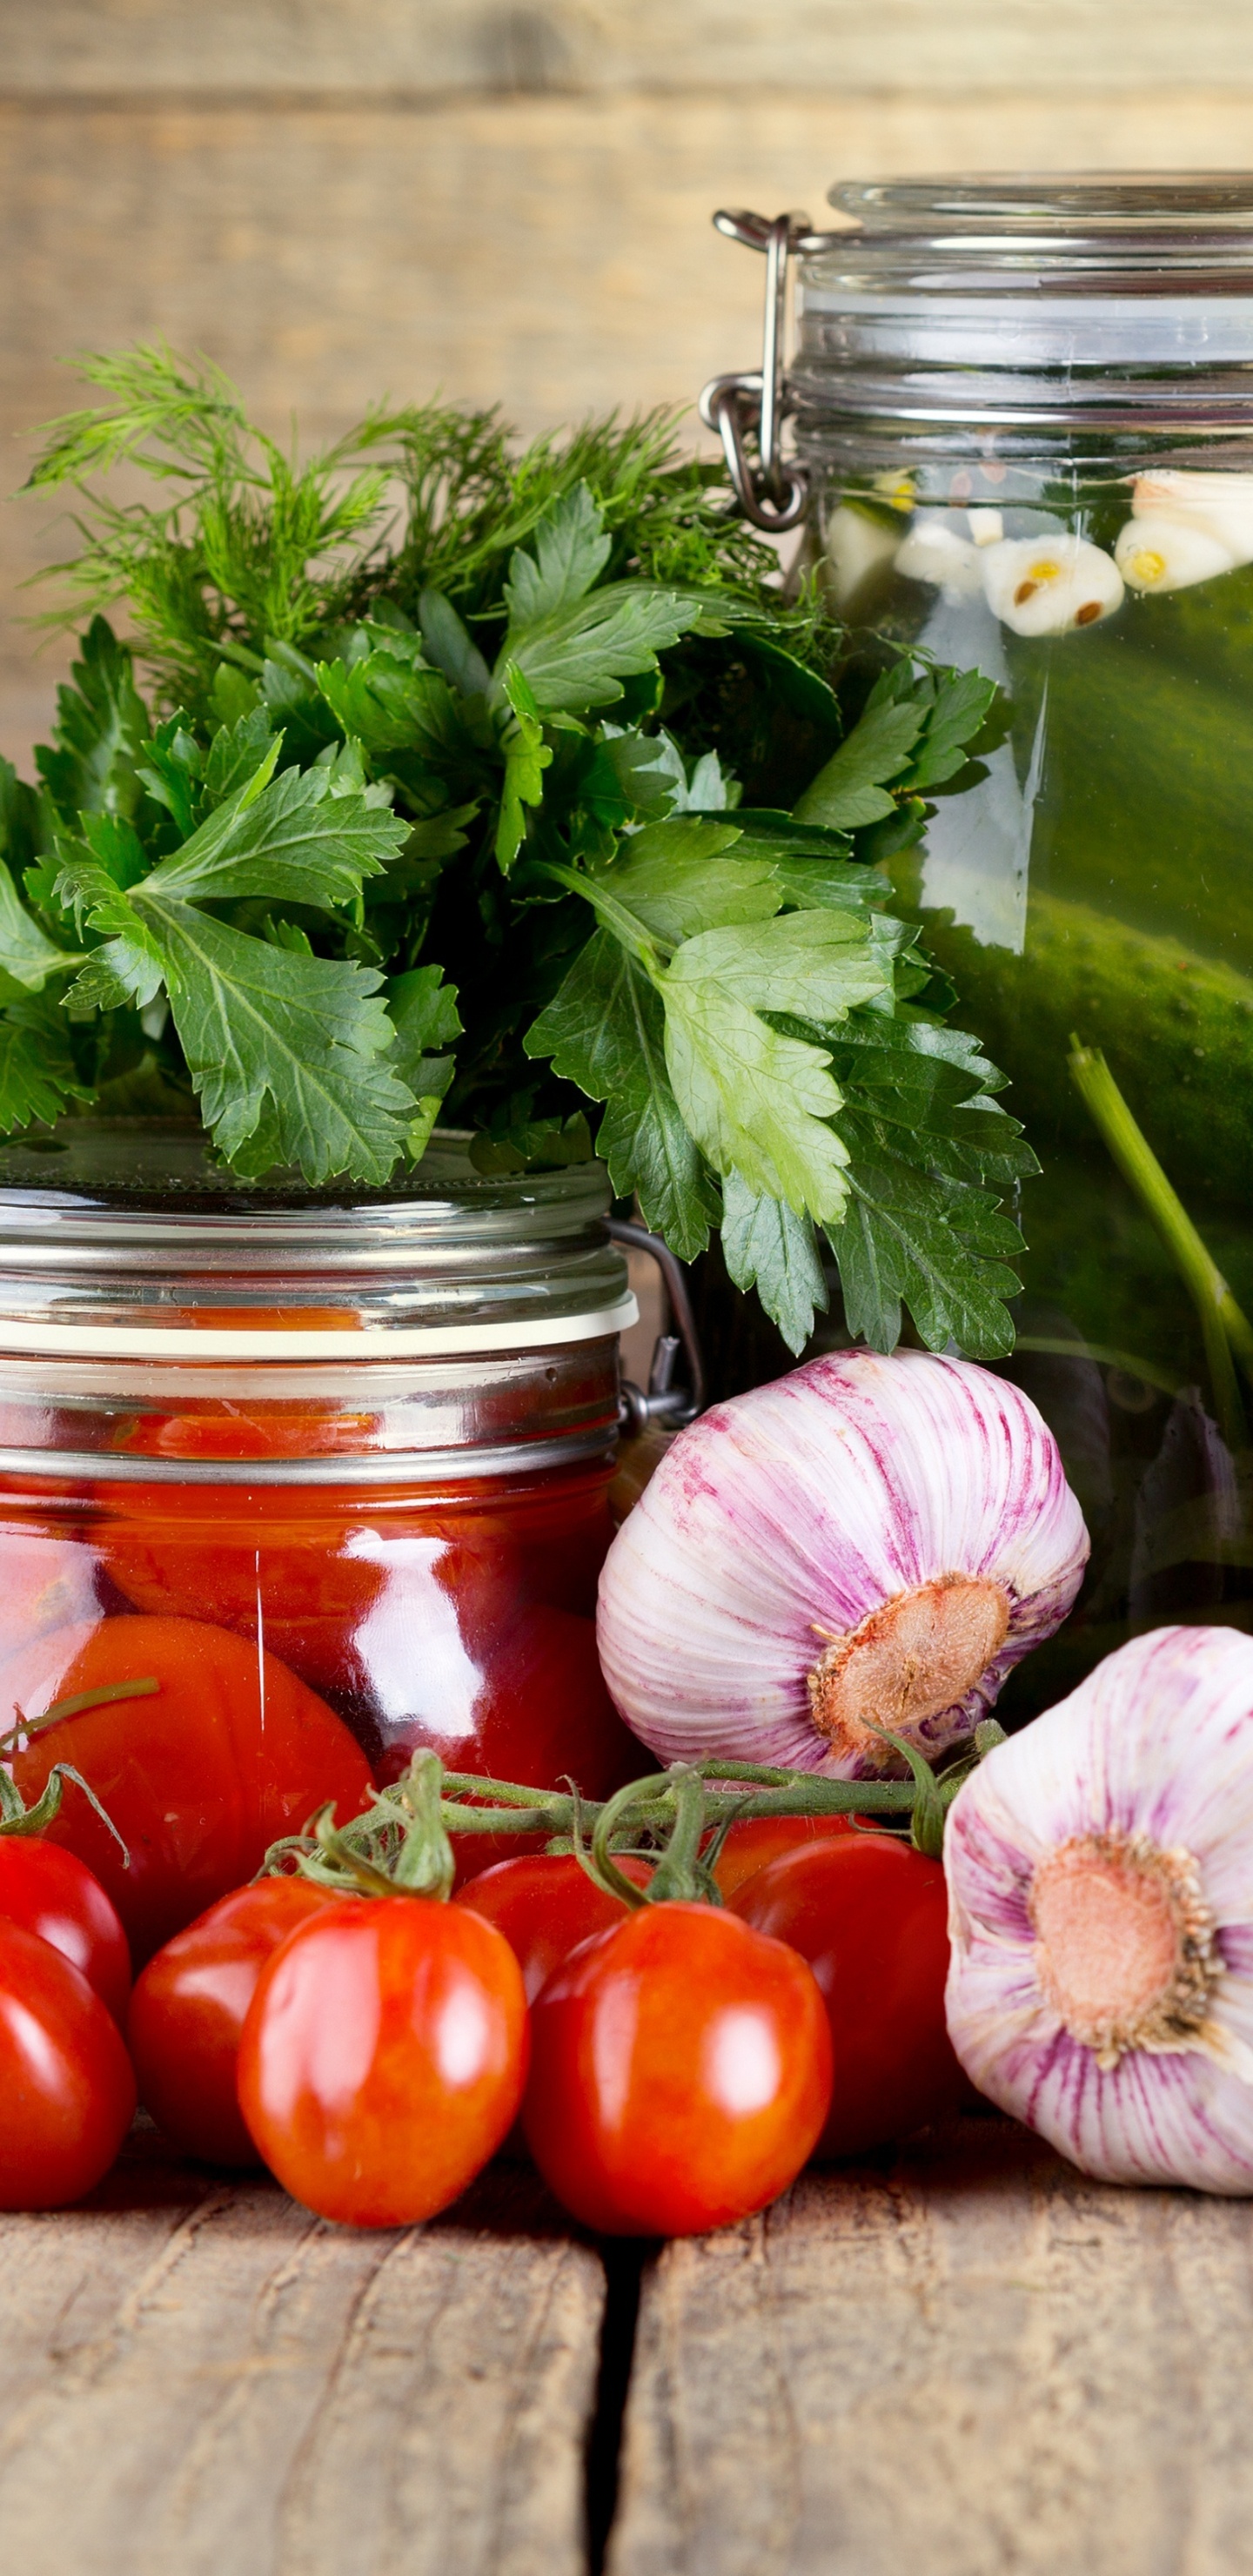 Red Tomatoes and Green Leaves in Clear Glass Jar. Wallpaper in 1440x2960 Resolution